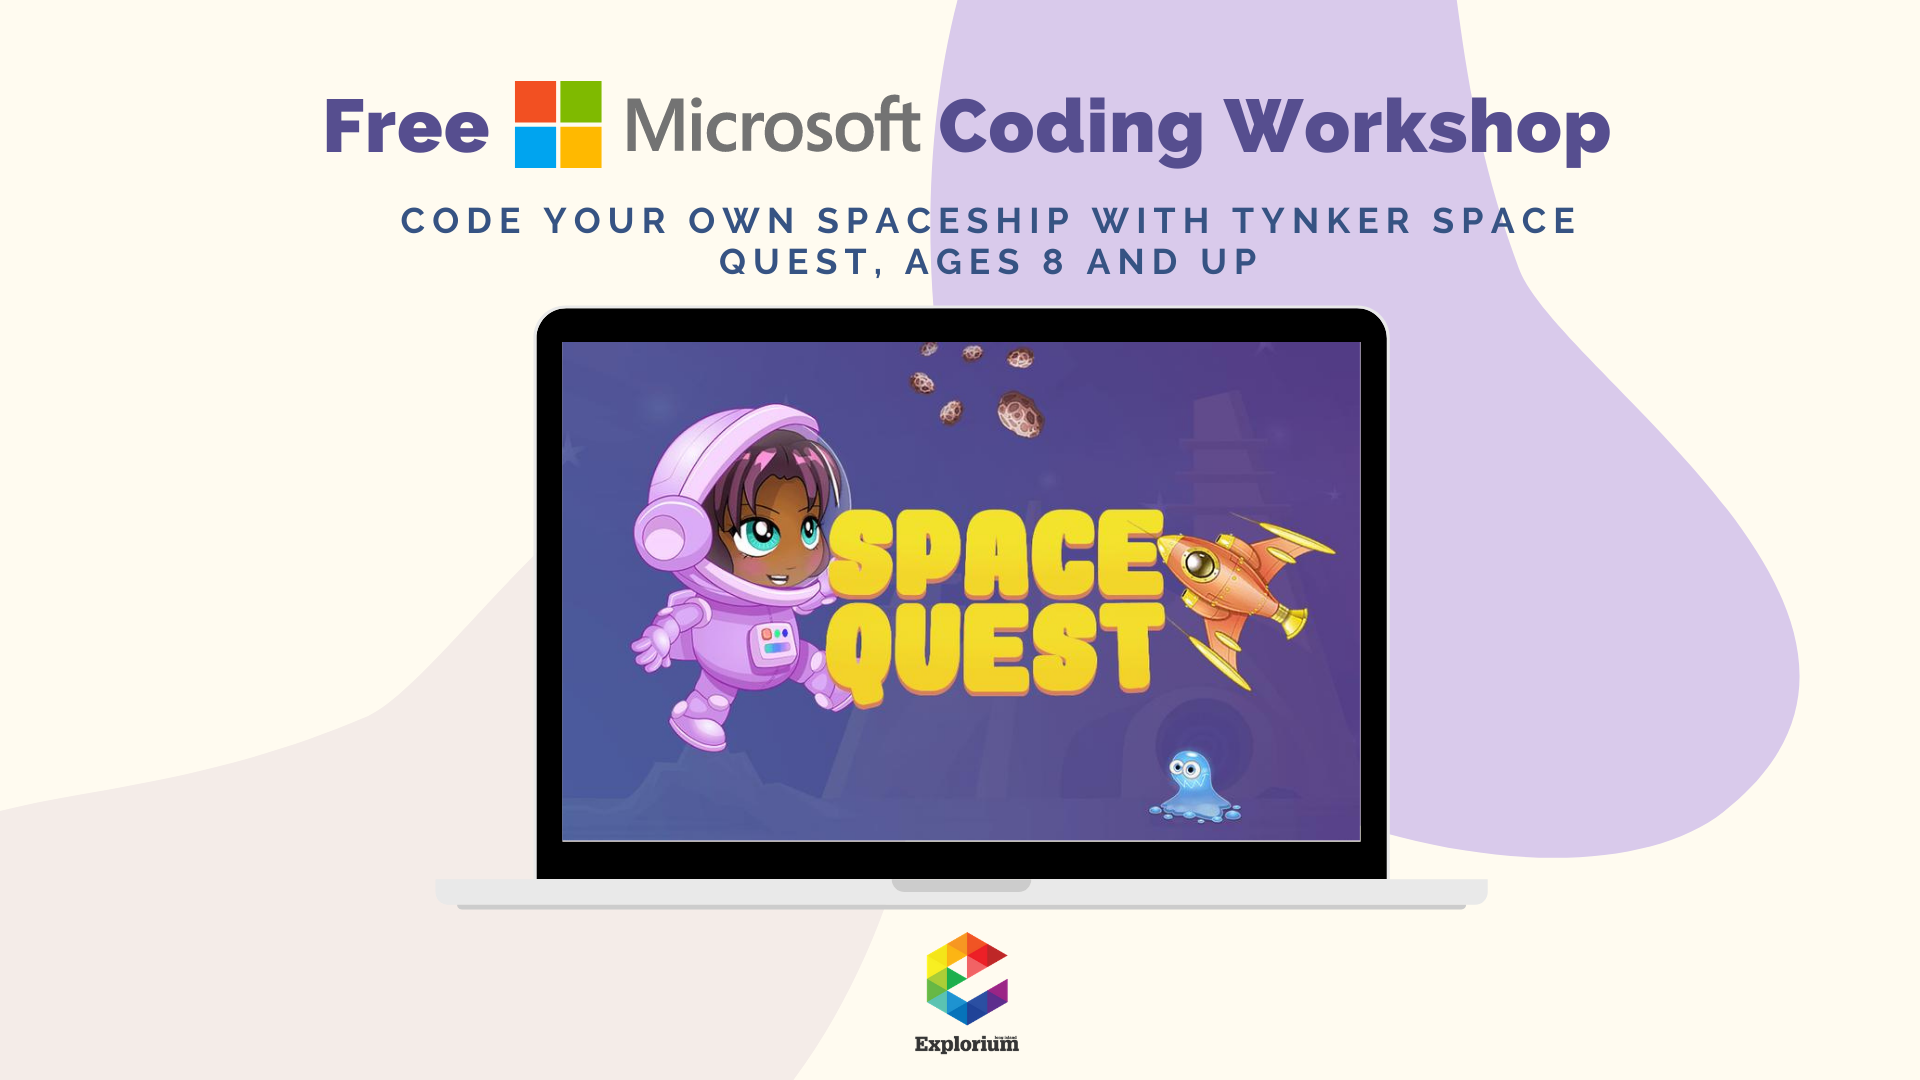 Code your Own Spaceship Tynker Space Quest workshop event - feb 18th